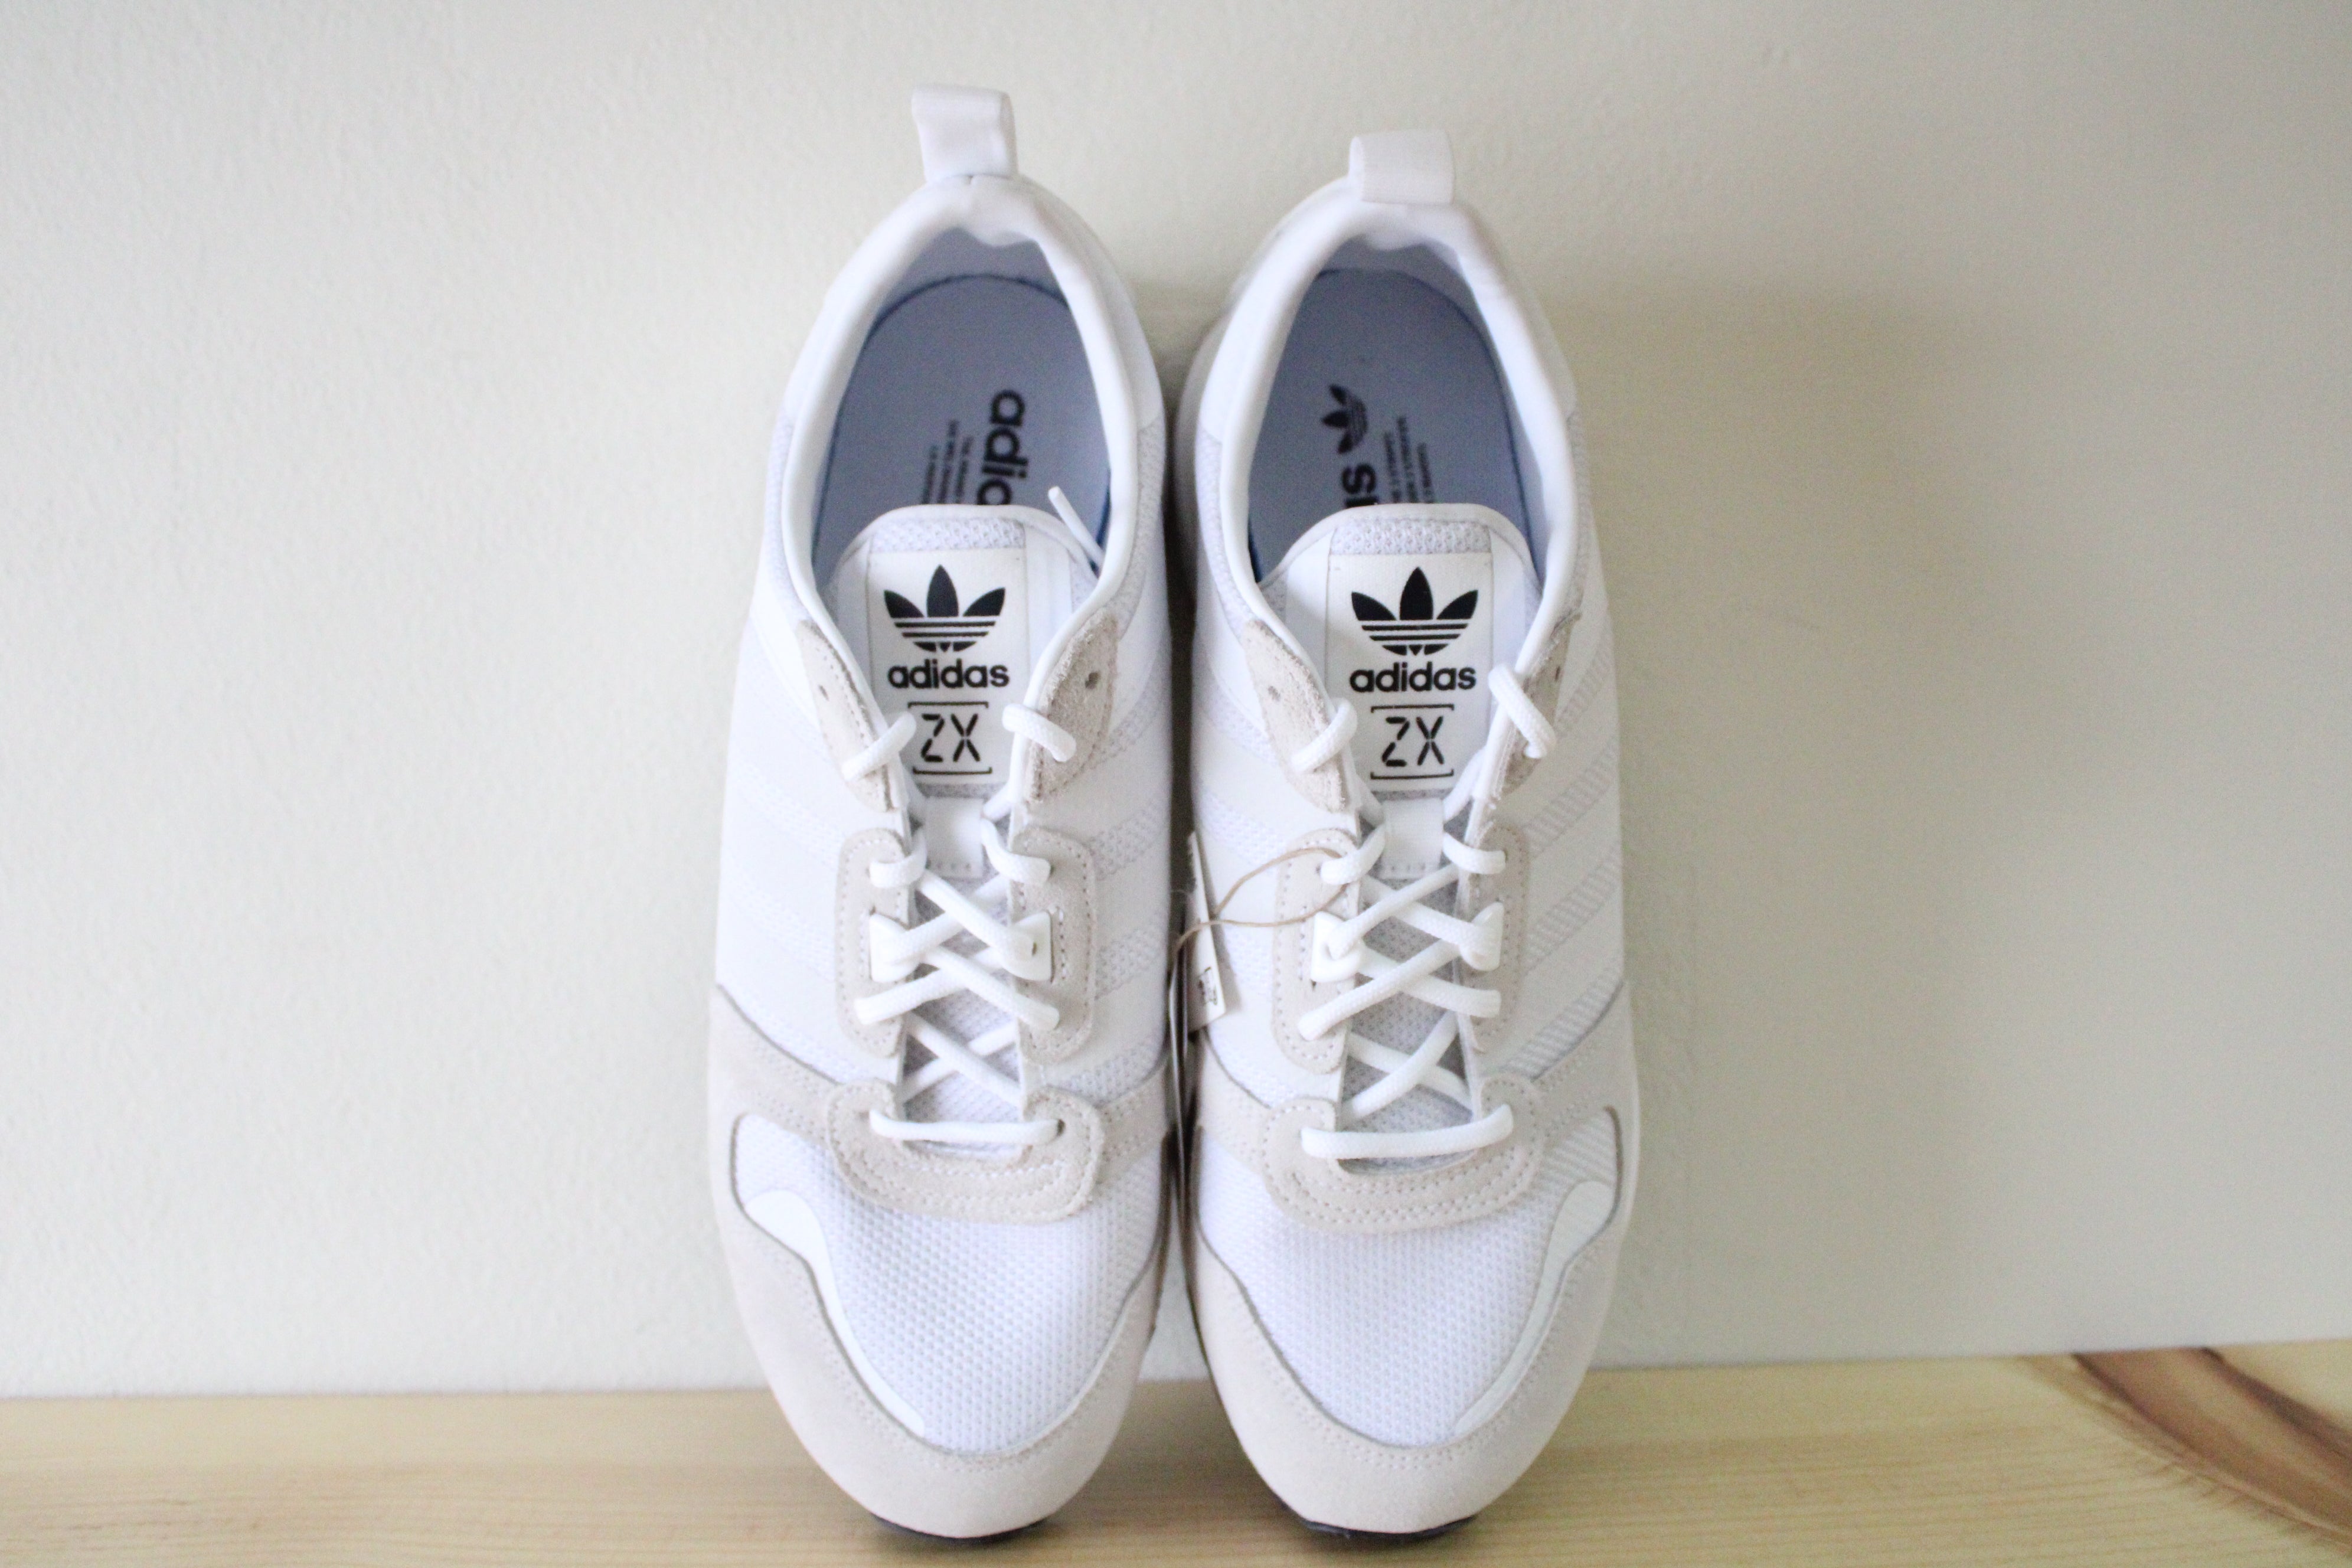 White 1/2 | 9 ZX – Sneakers Jubilee Originals NEW Men\'s Thrift Adidas Size 700